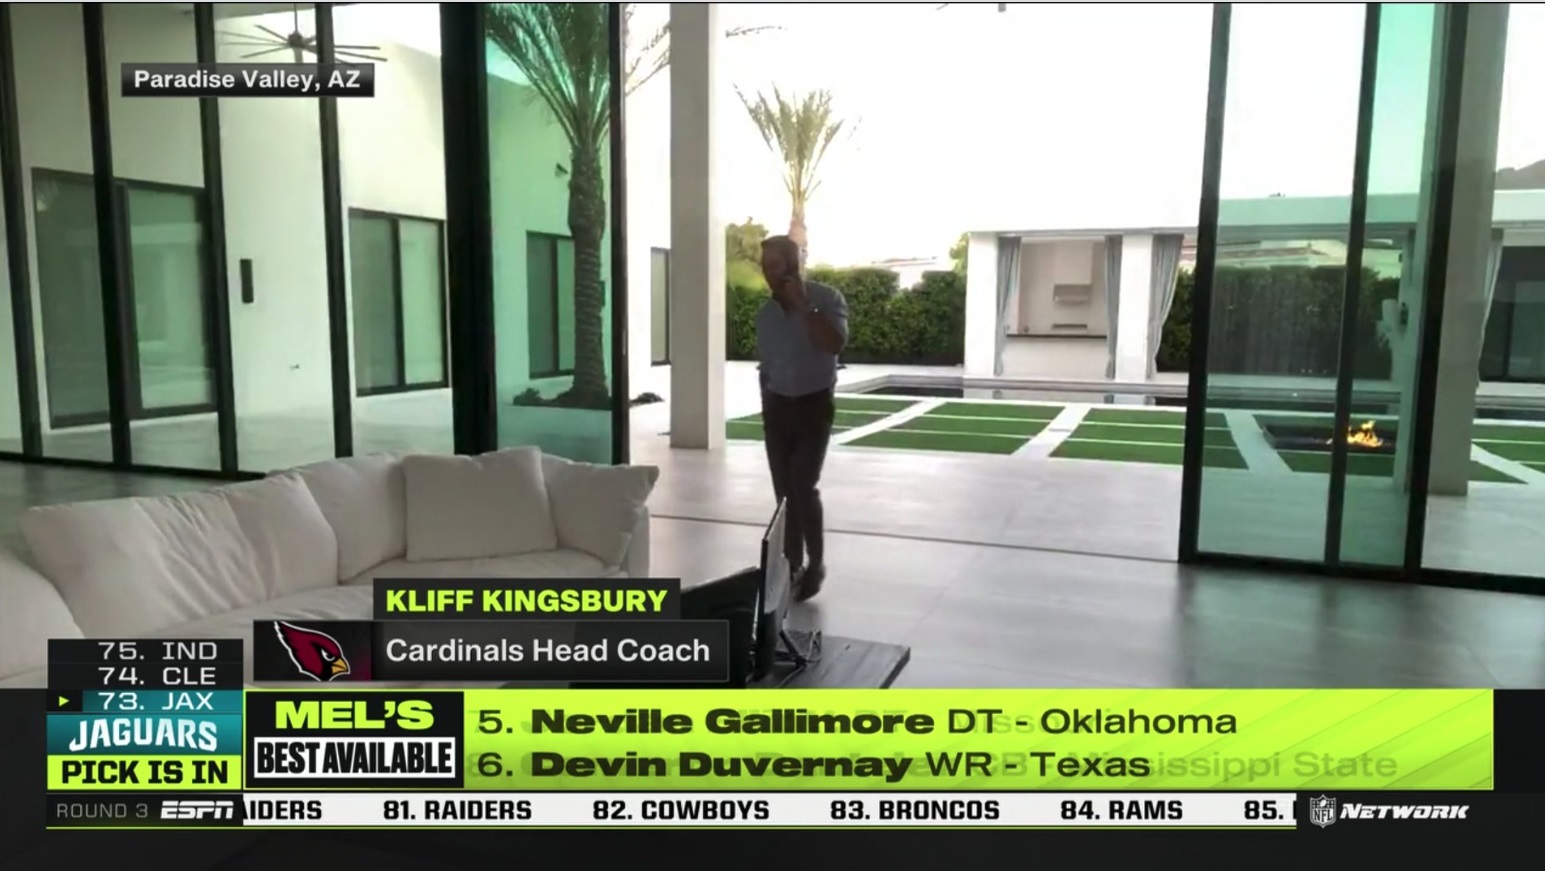 PHOTO Kliff Kingsbury Opened The Massive Glass Doors To His Massive Backyard To Walk Around While On The Phone And He's Got His Fire Pit Going In 95 Degree Weather